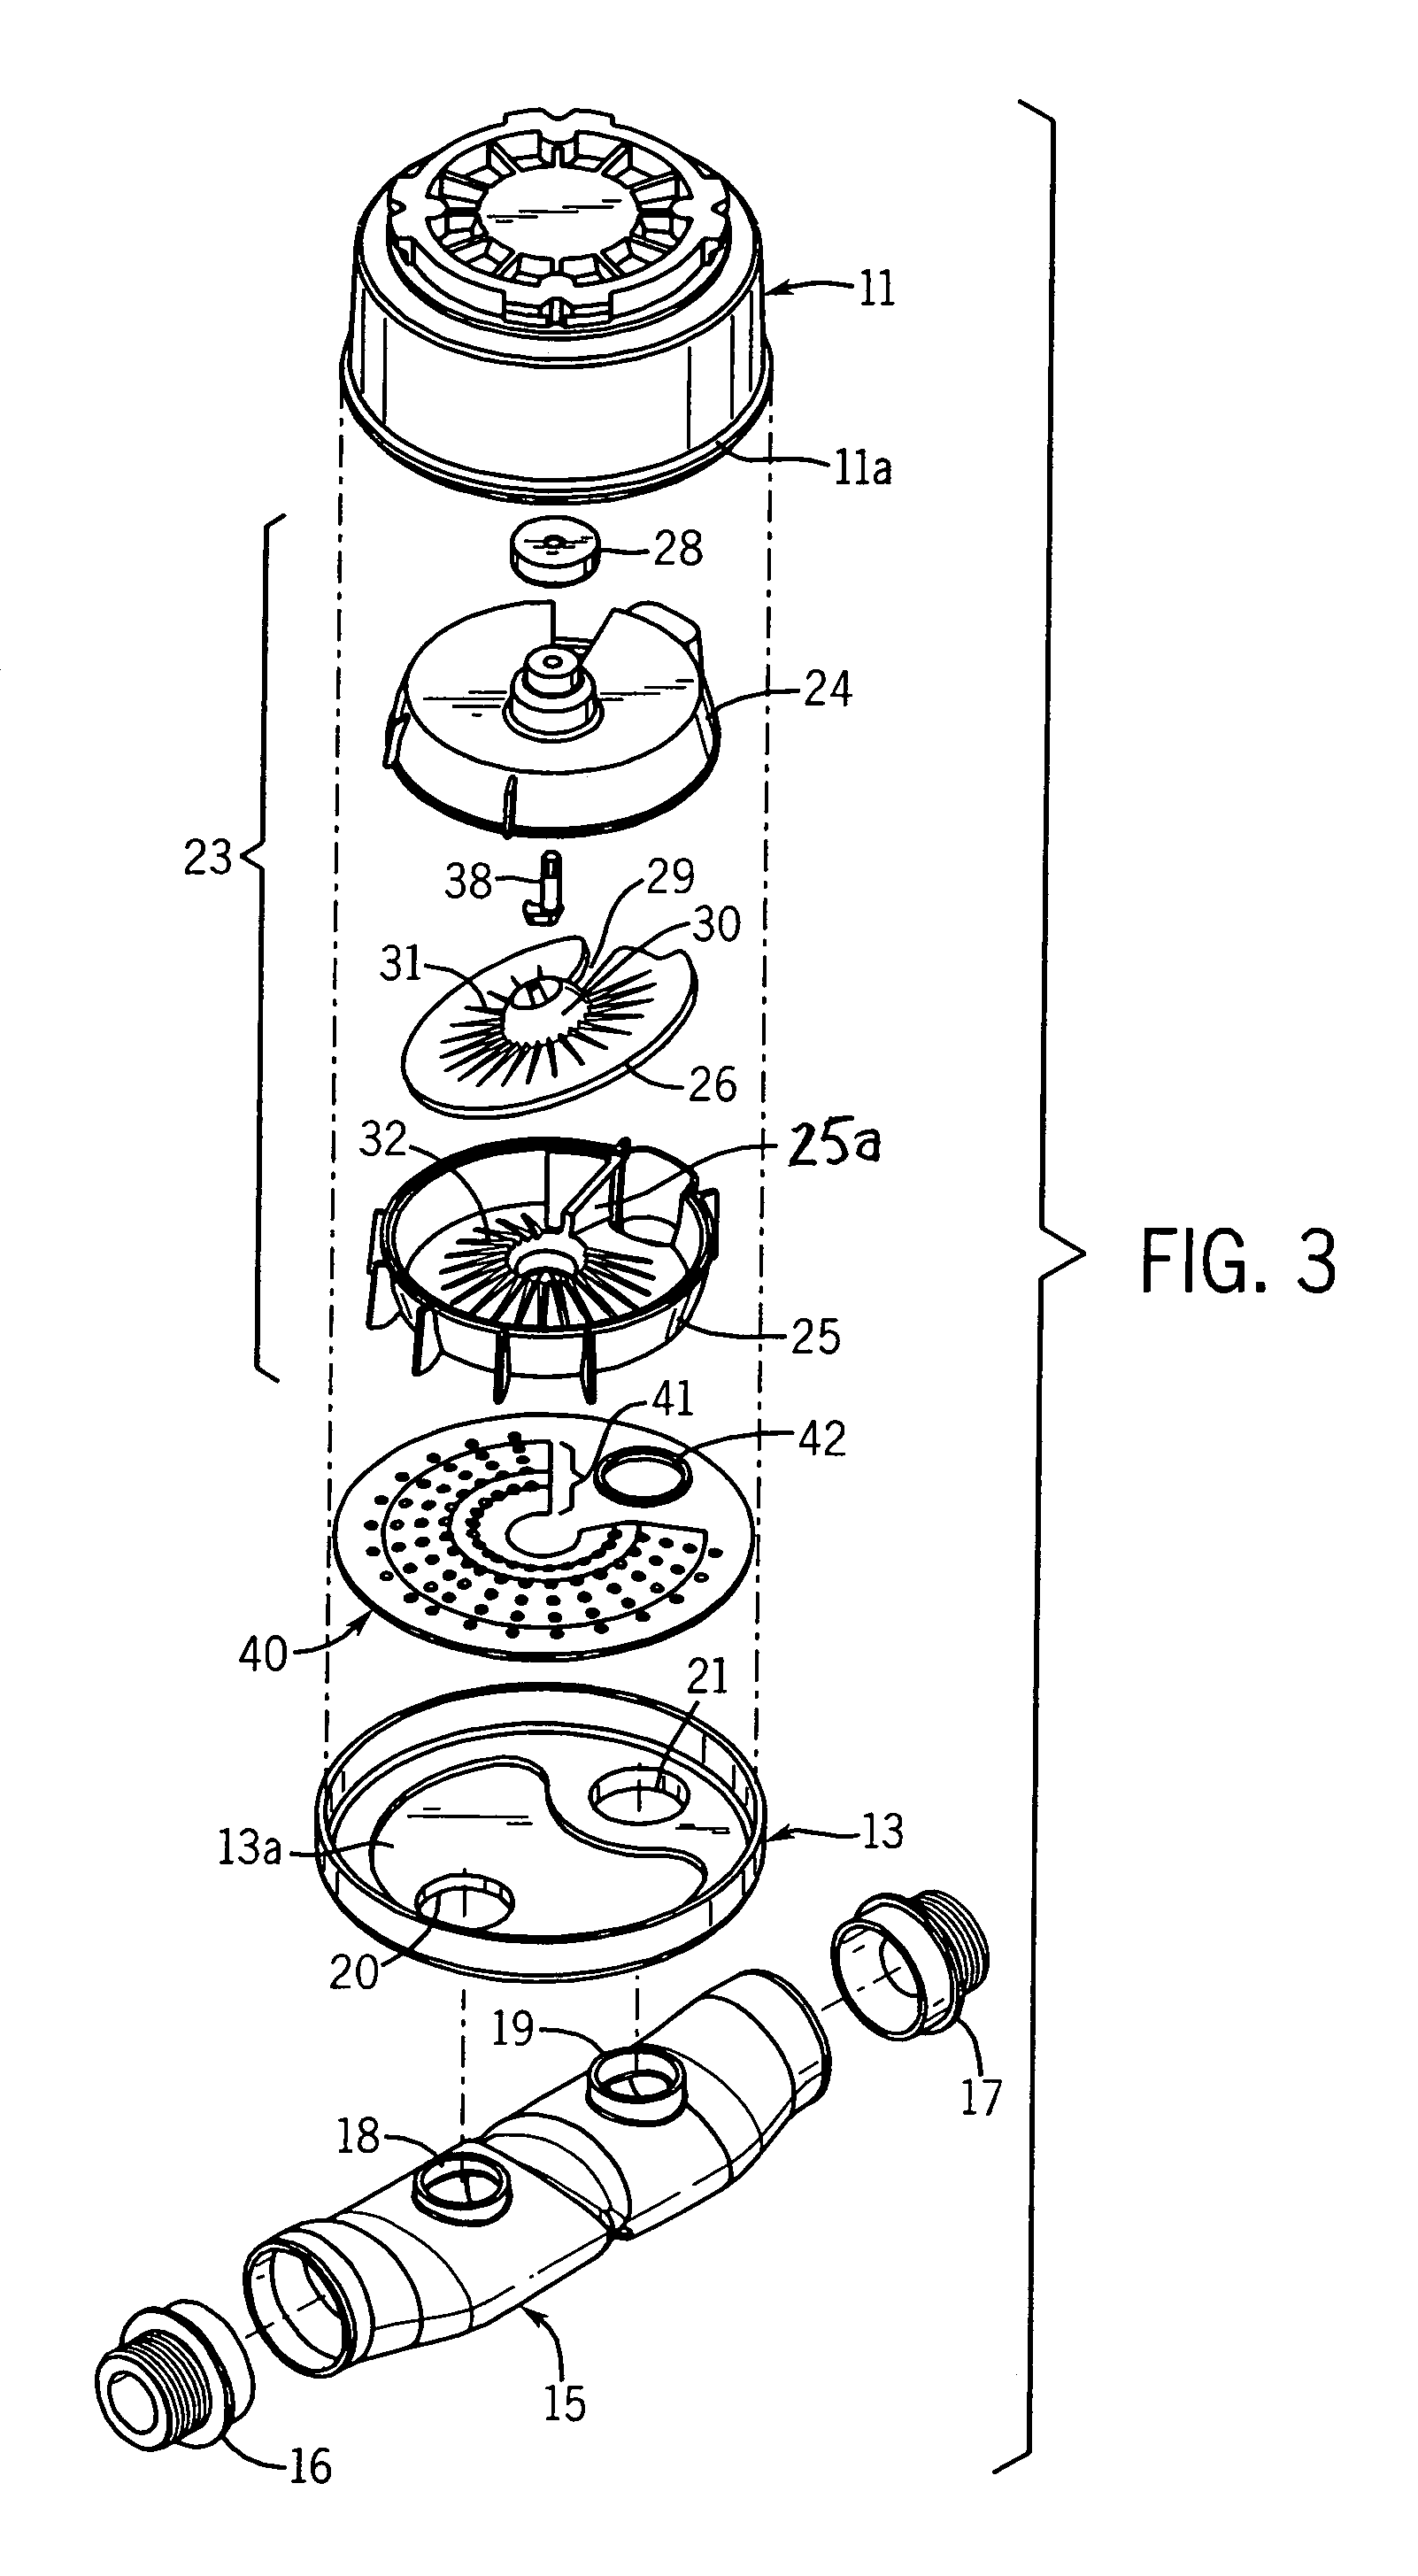 Meter housing assembly and method of assembly